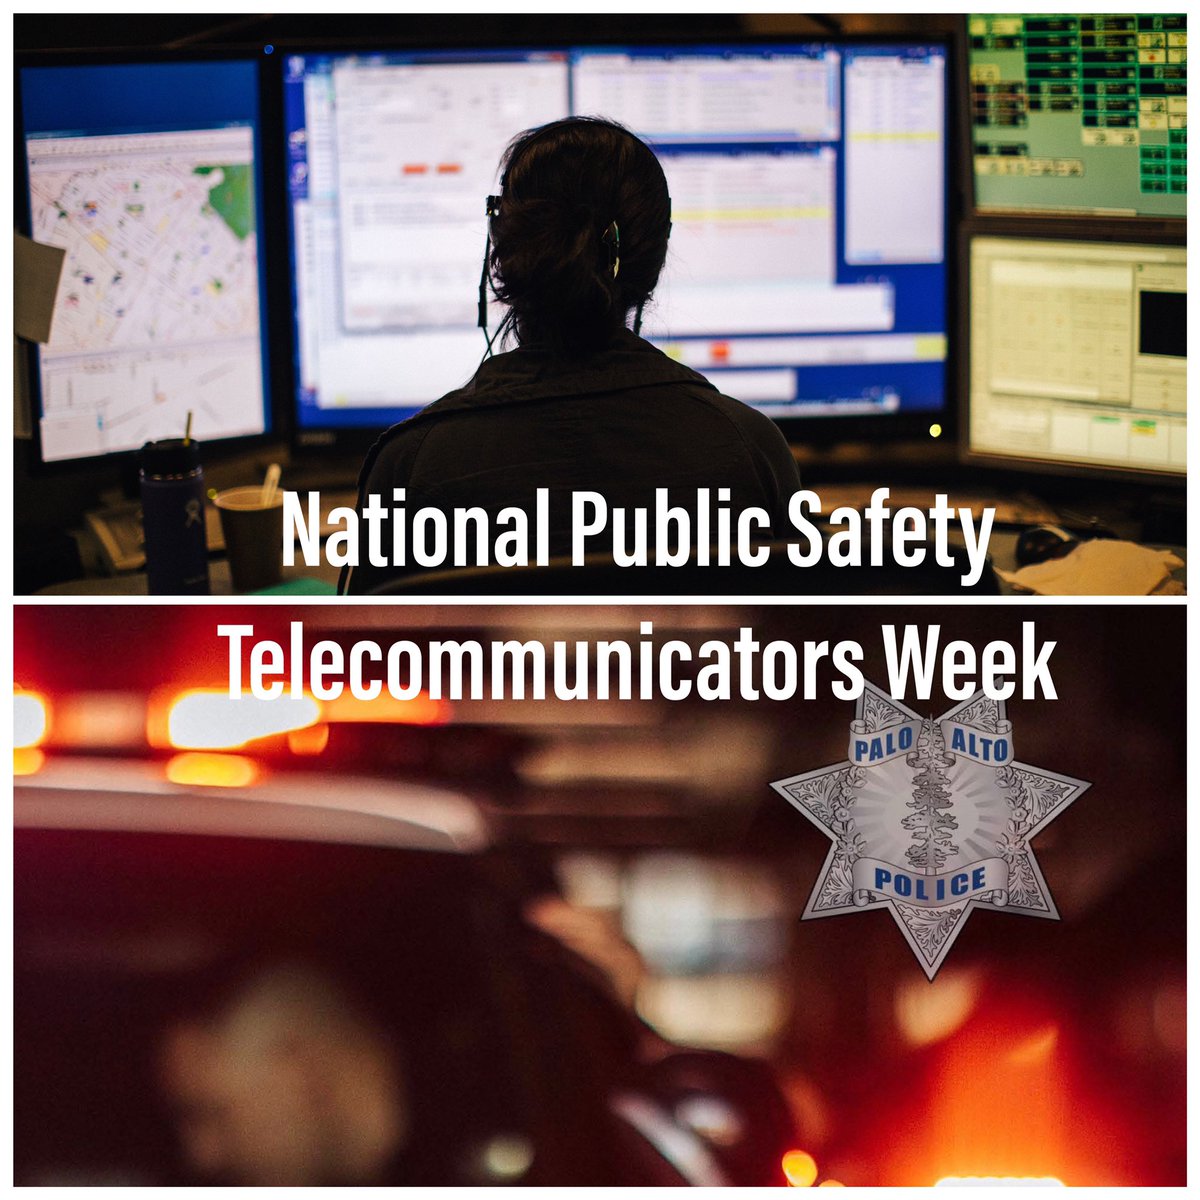 Join me in a huge shout-out to the amazing men and women of our communication team as we celebrate #NationalPublicSafetyTelecommunicatorsWeek. They’re the calm voice during our time of need, and the reassuring presence that help is on the way! 🚔🙏#Dispatchers #IncredibleHumans